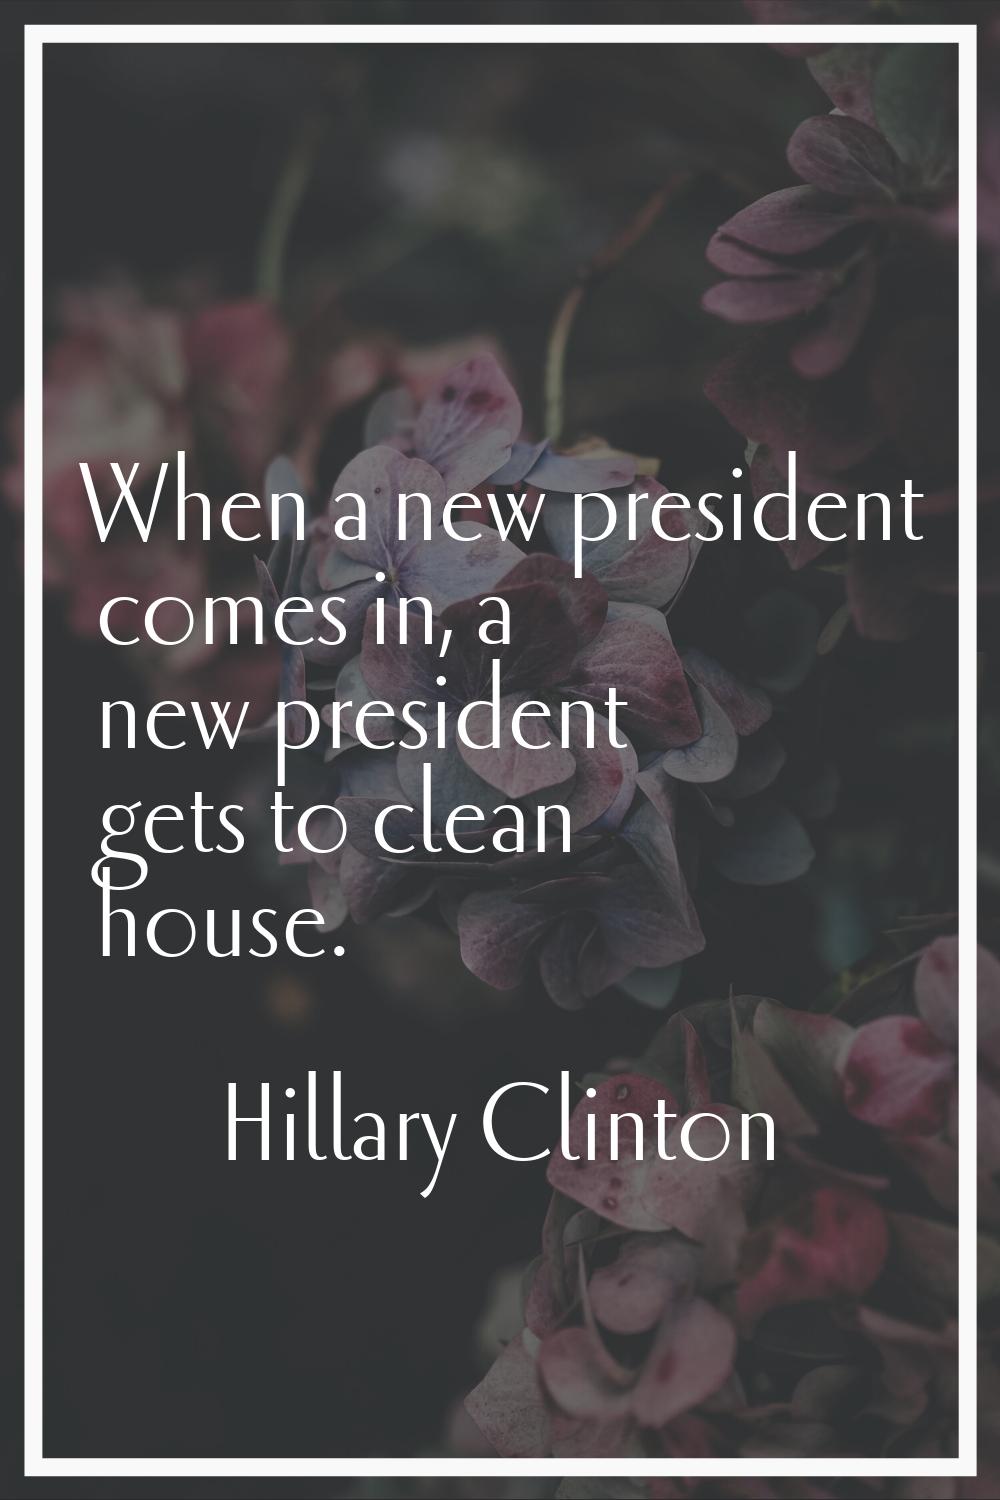 When a new president comes in, a new president gets to clean house.